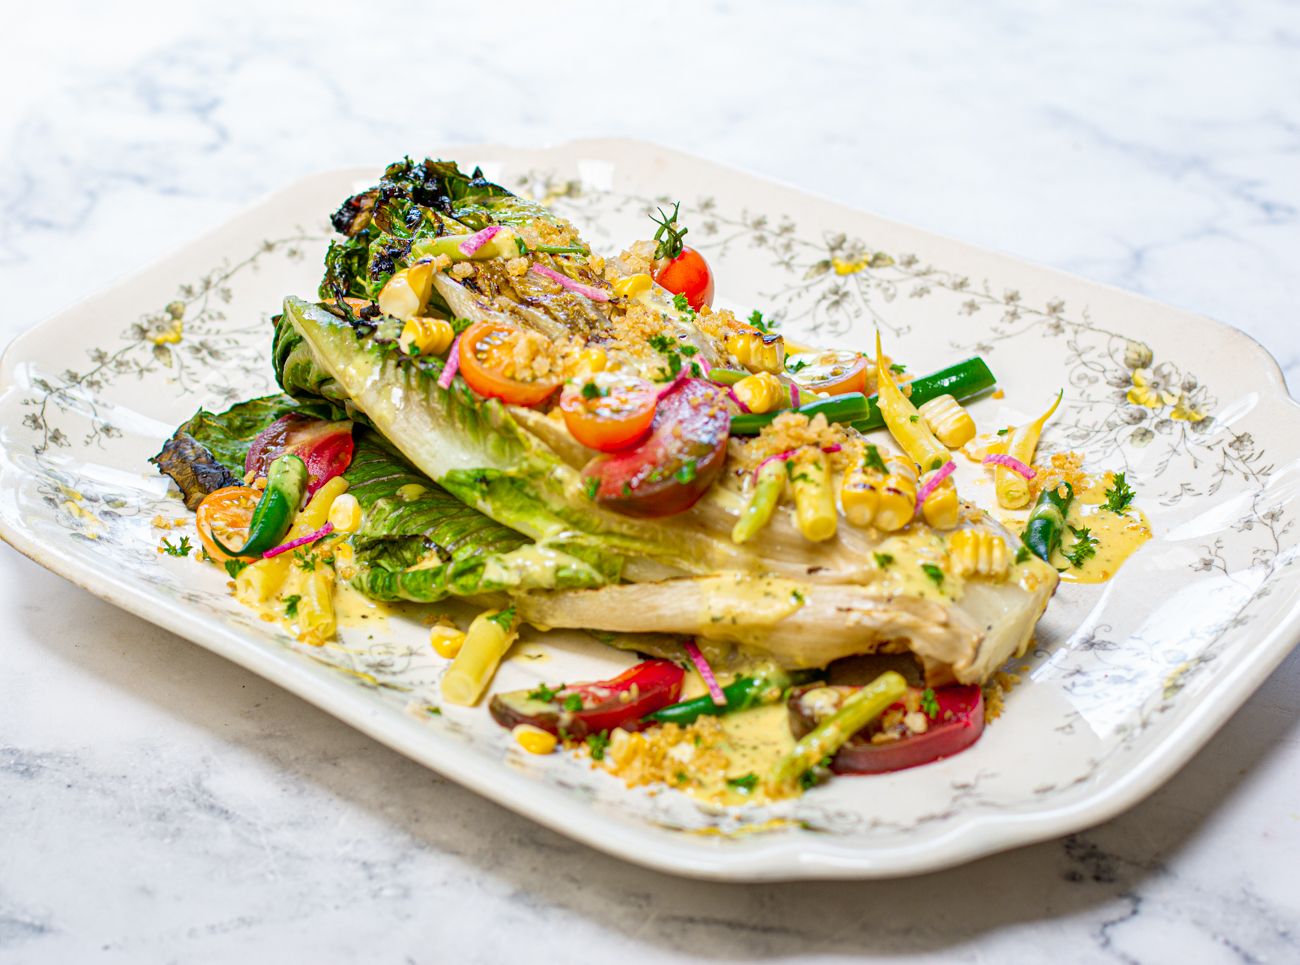 Grilled Romaine Lettuce with Corn, Green Bean & Tomato Salad